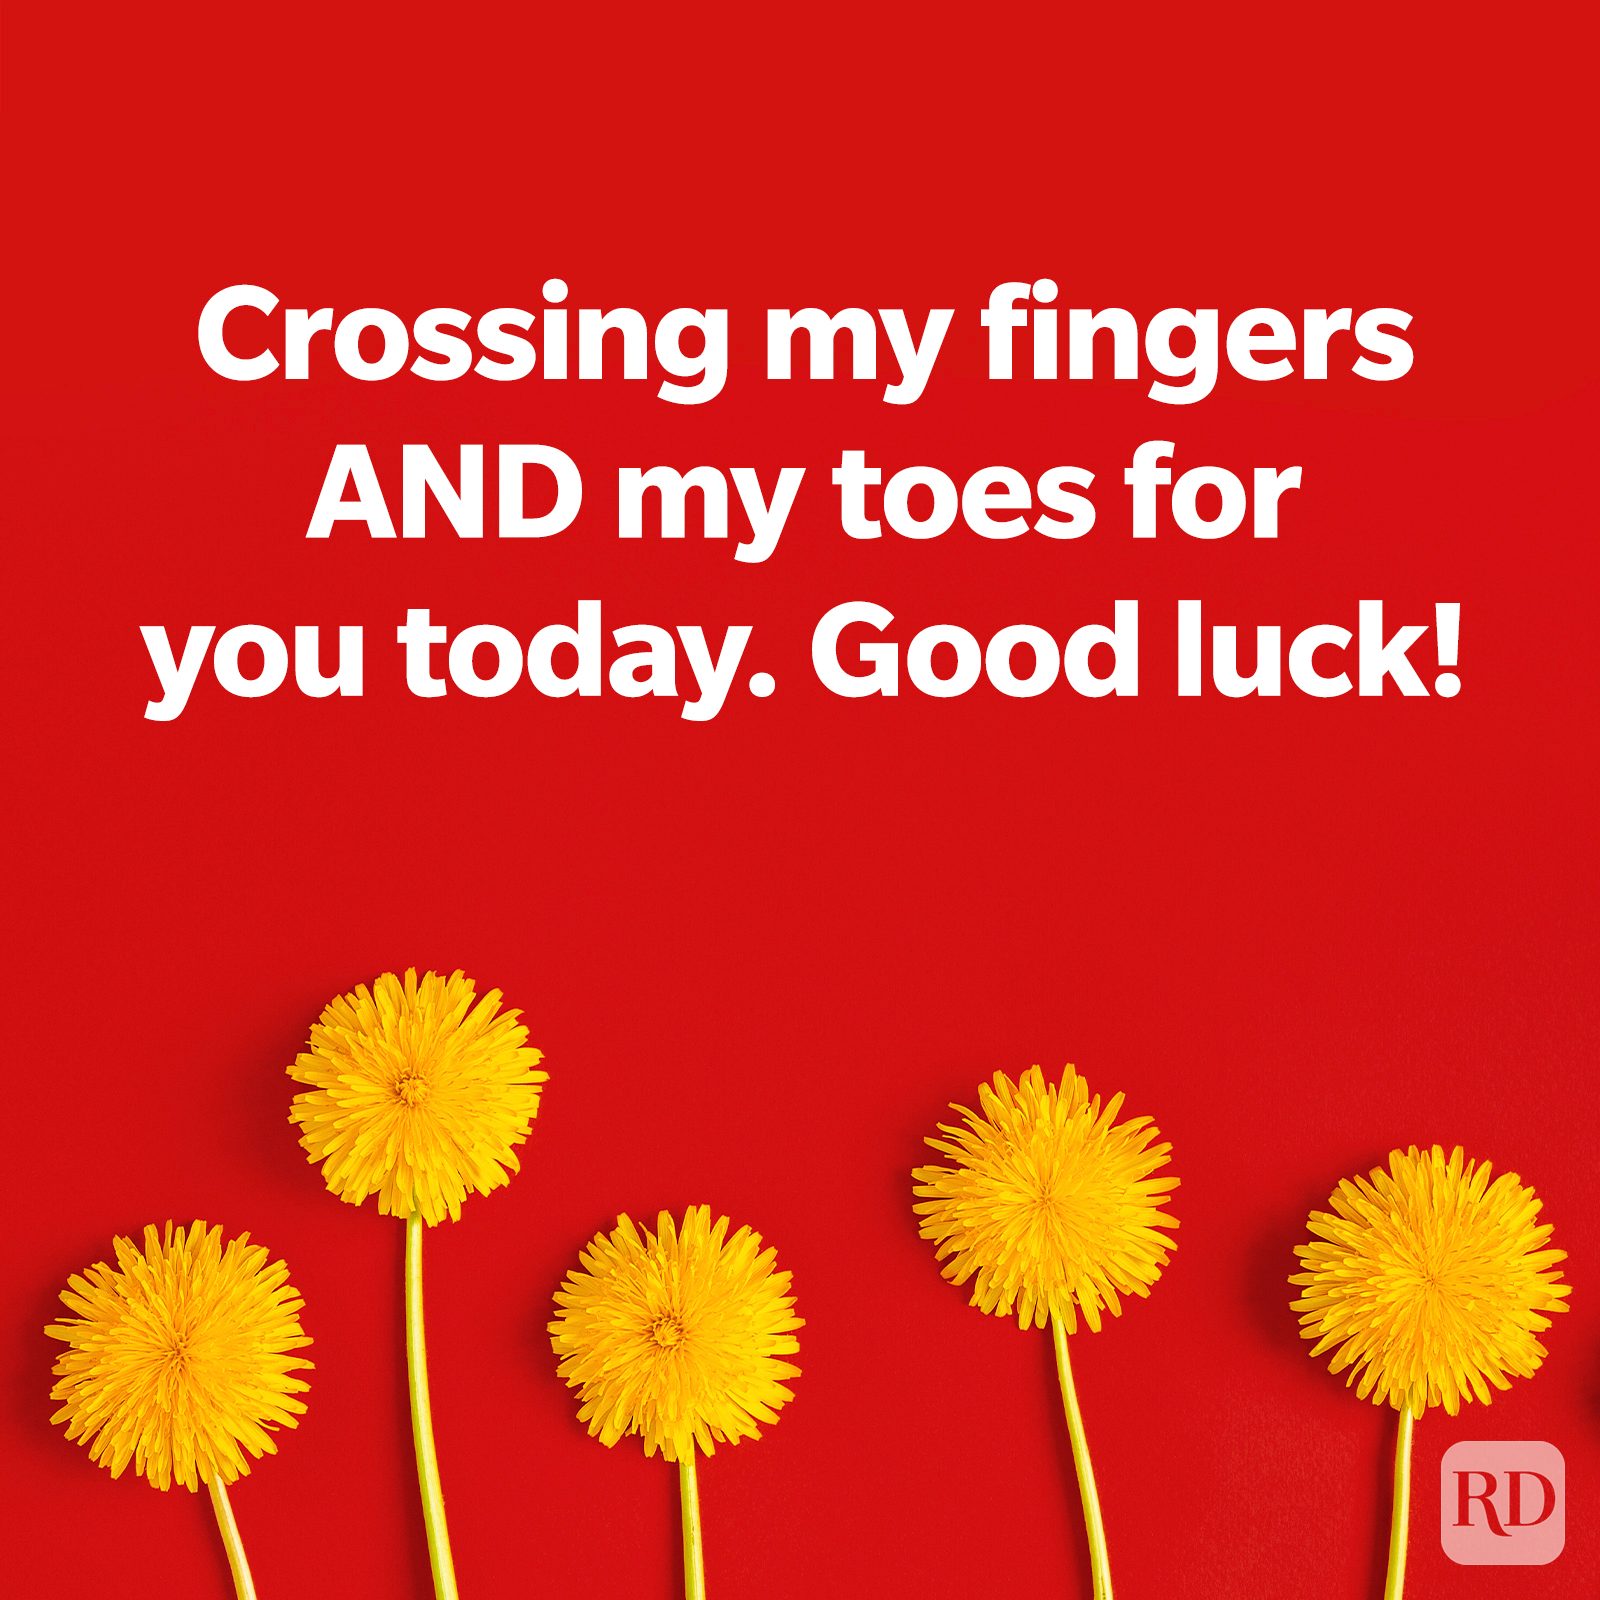 35+ Good Luck Messages to Express Encouragement